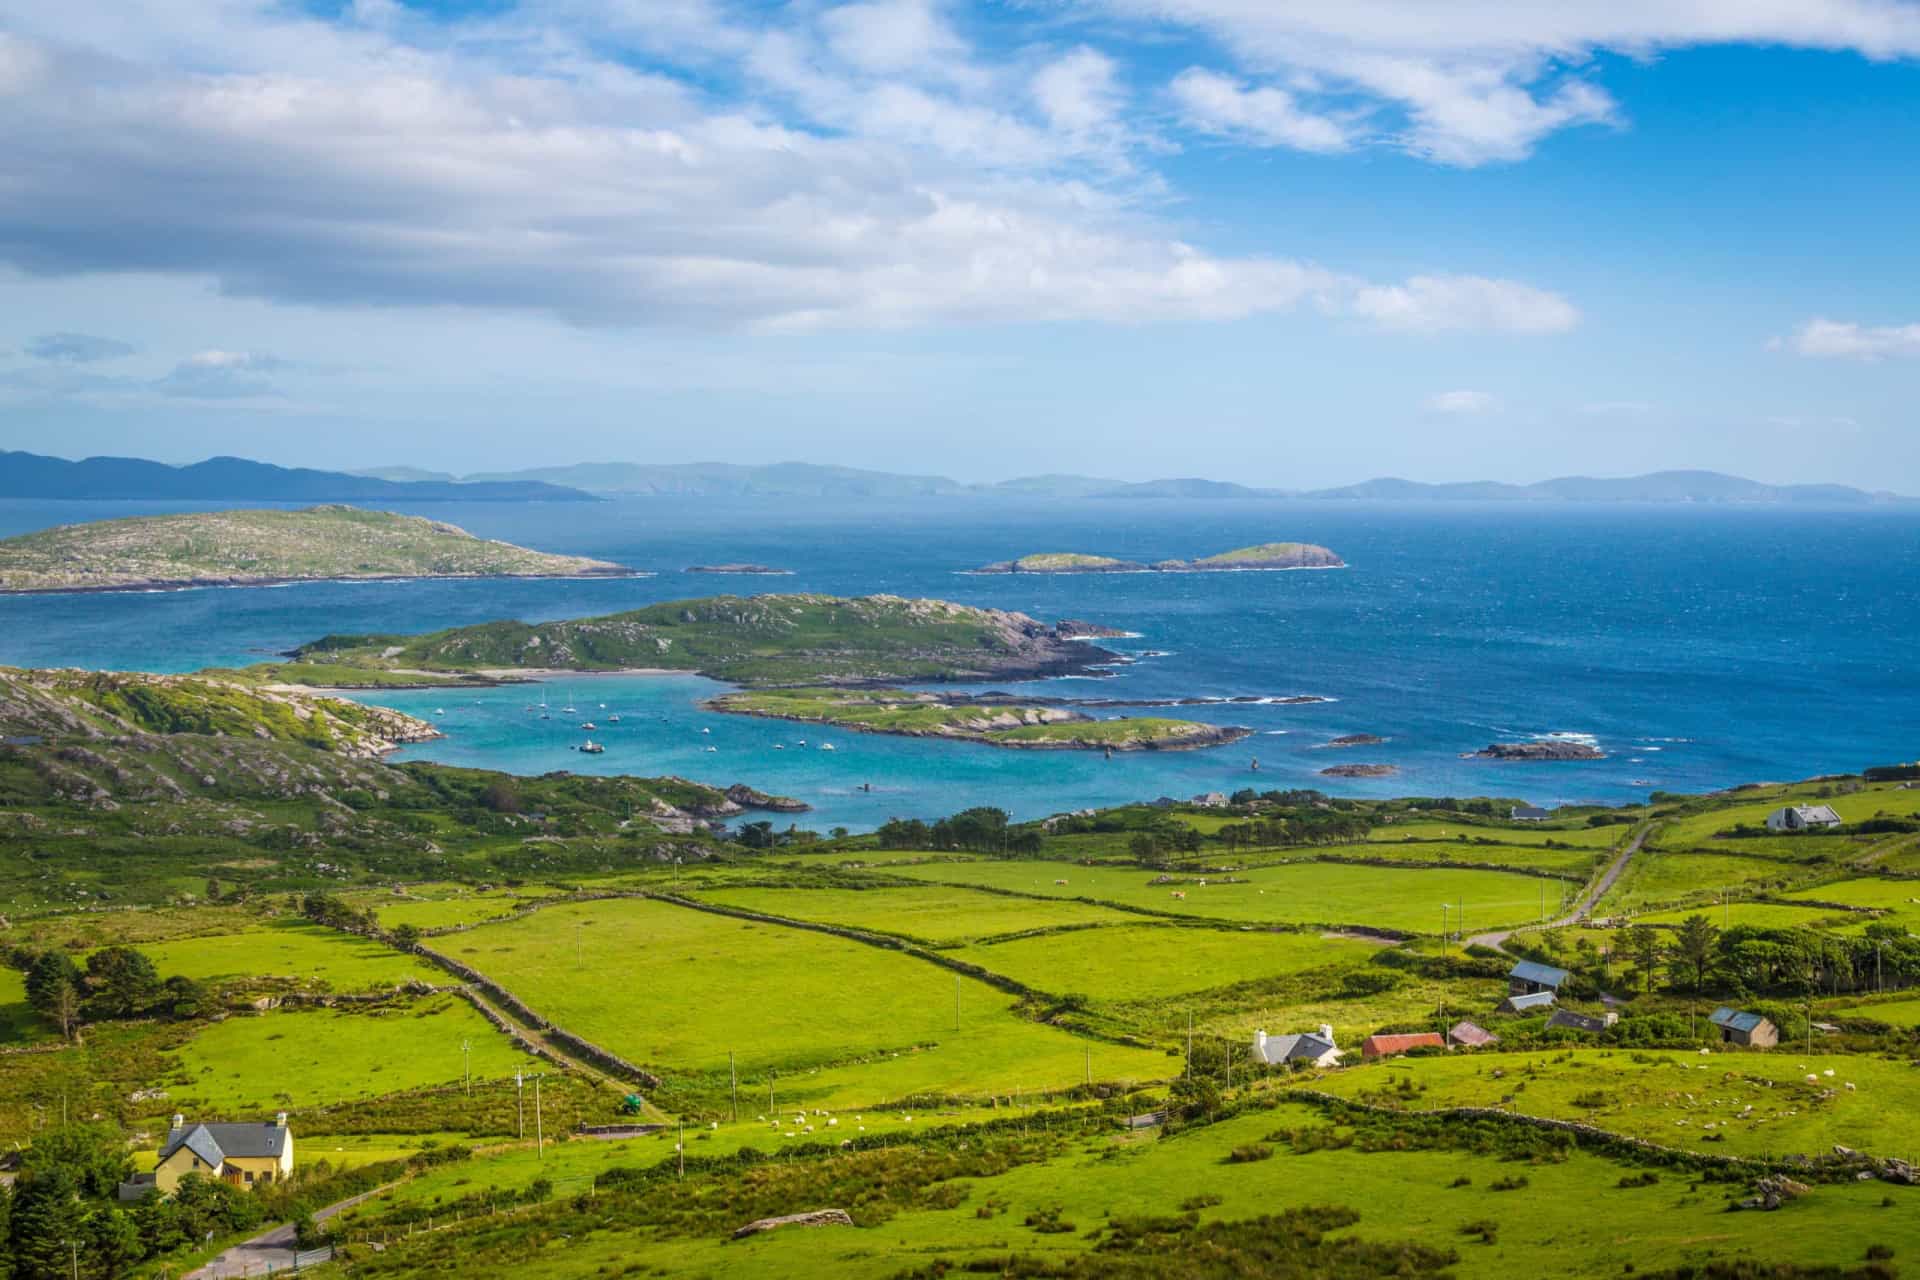 <p>Derrynane is what's known as a  townland, a small geographical division of land the system of which is Gaelic in origin. Located on the Iveragh peninsula, Derrynane is not much more than a cluster of cottages surrounded by the ruins of an ancient abbey and a couple of old forts. A <a href="https://www.starsinsider.com/travel/239903/the-uk-and-irelands-most-fascinating-neolithic-sites" rel="noopener">dolmen</a> standing nearby is believed to date back to 3000 BCE.</p>